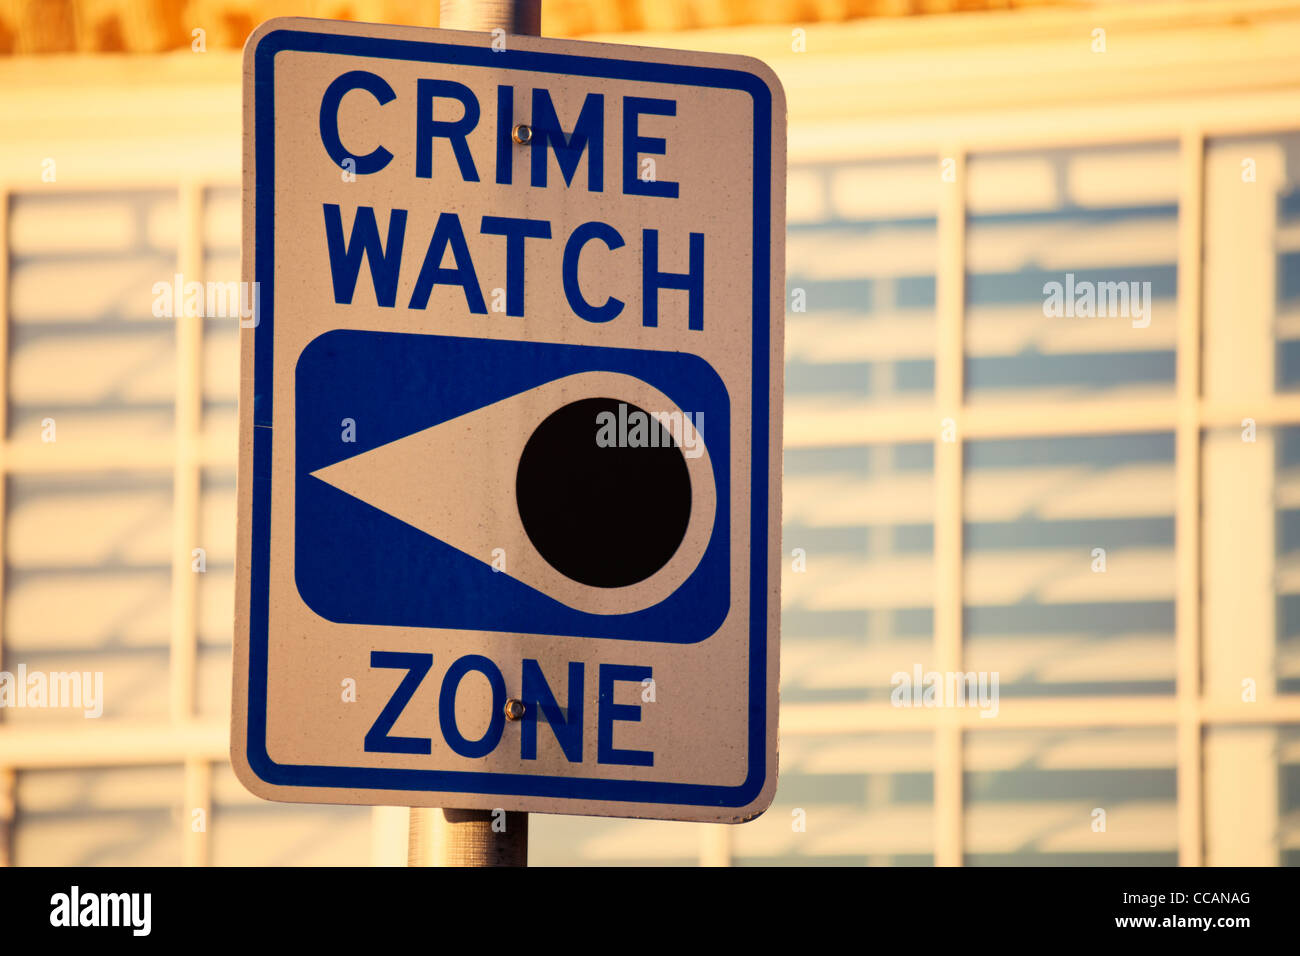 Zone Crime Watch sign Banque D'Images